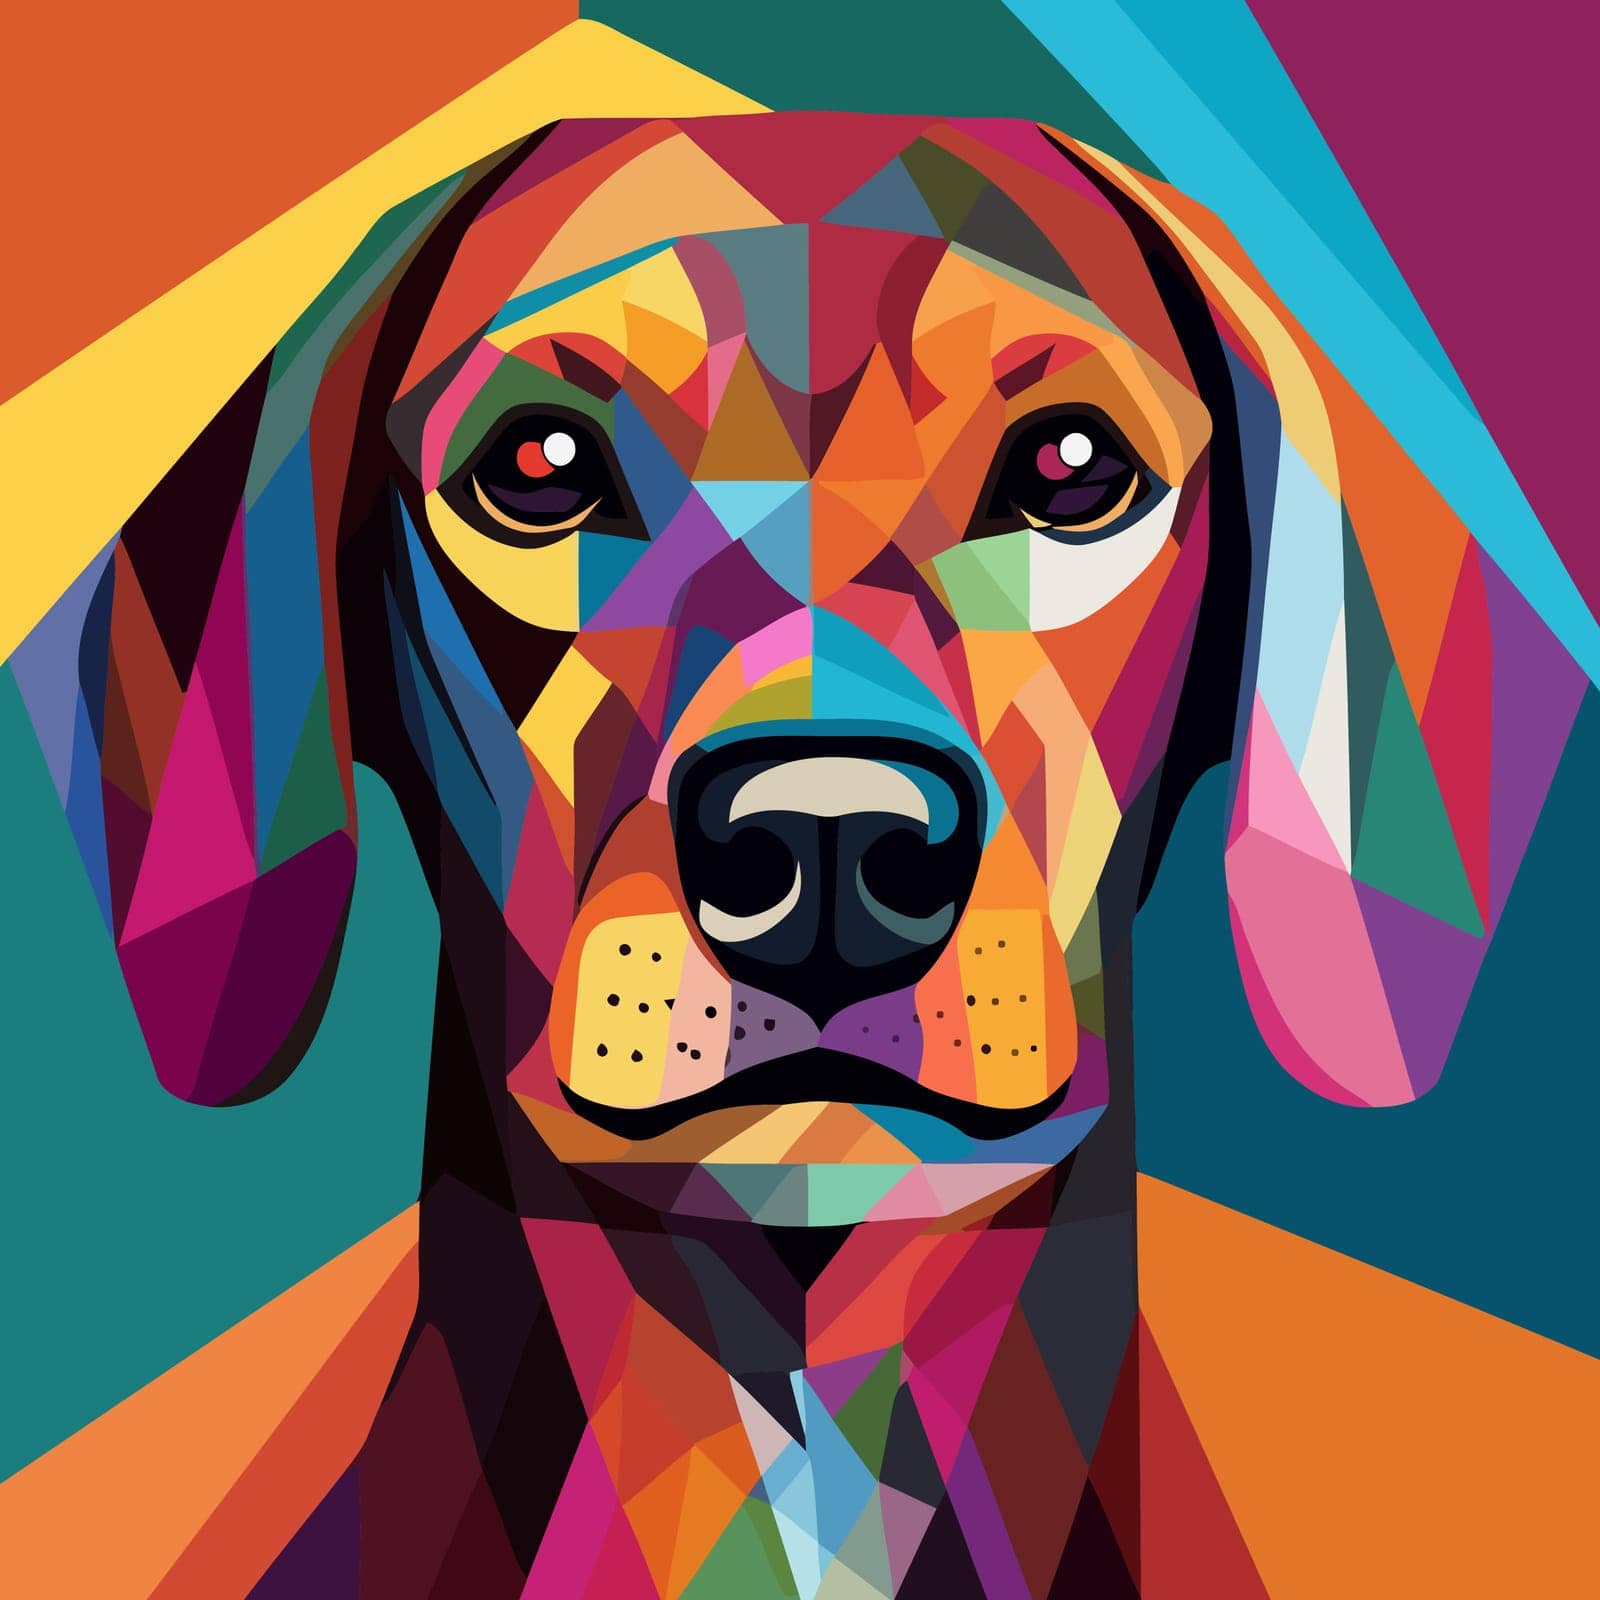 Dog painting in the style of cubism. Abstract painting of a dog in the style of Picasso. Vector illustration.